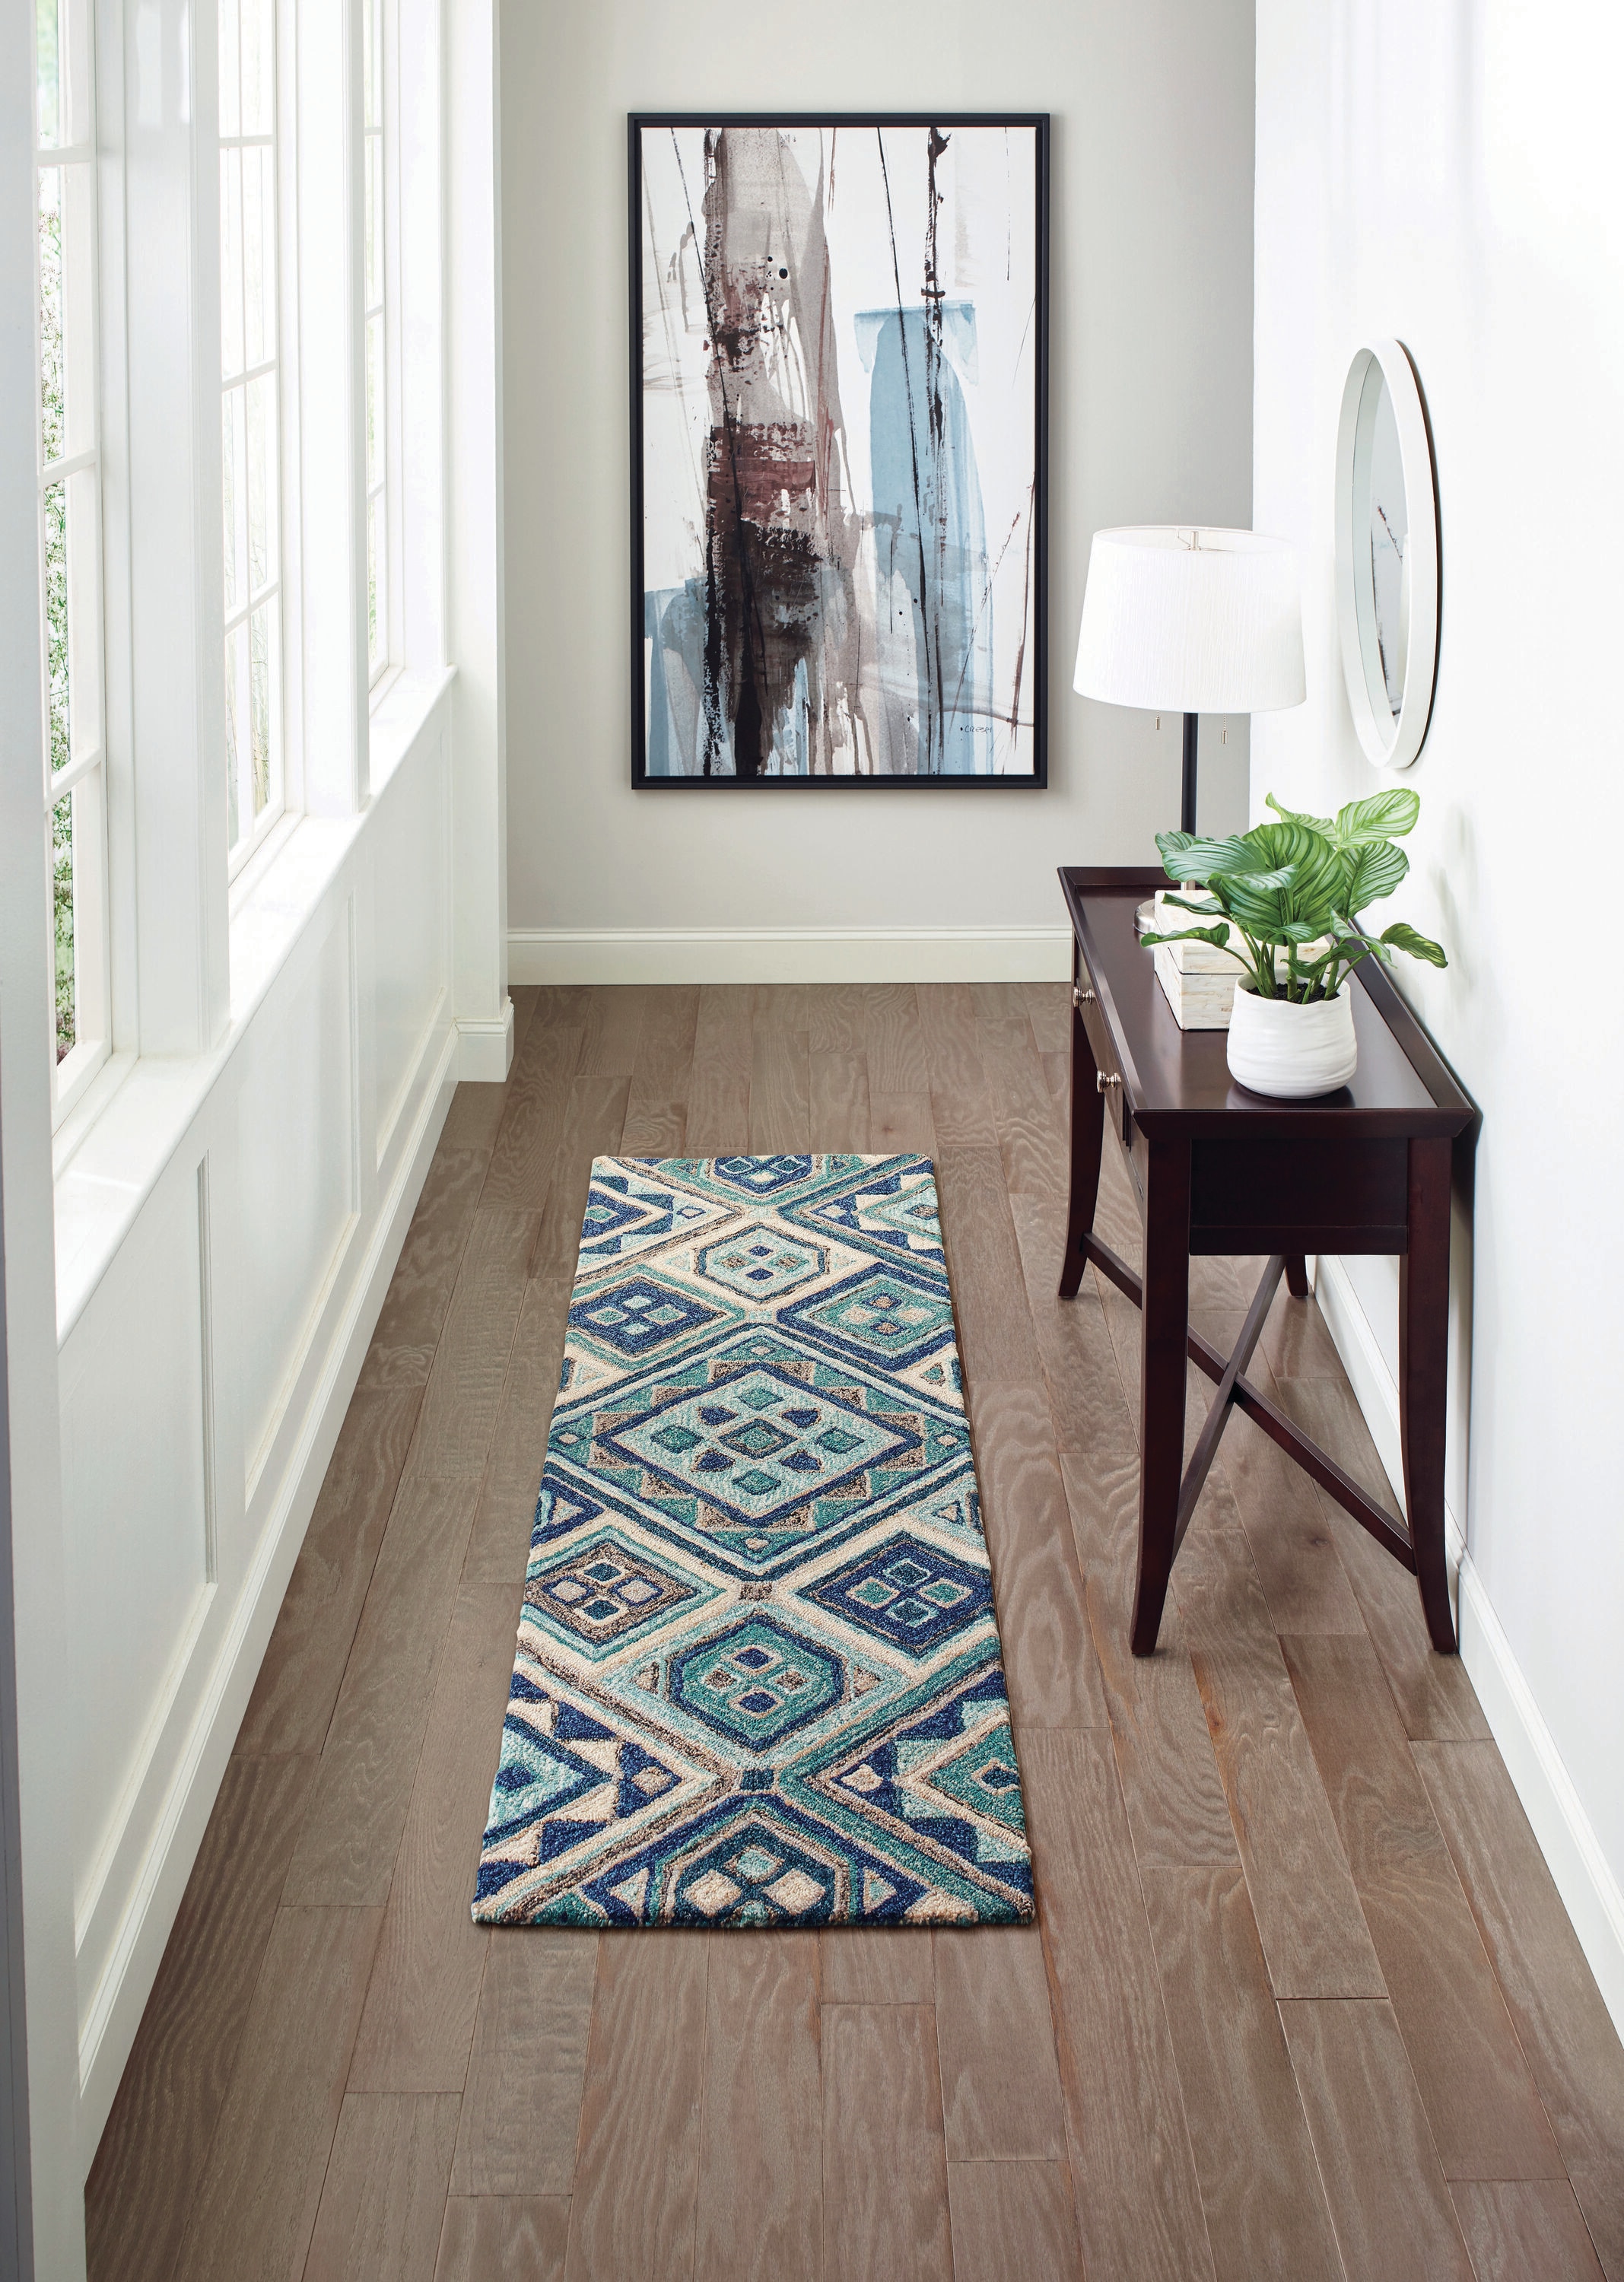 Teal Tiles 2 x 7 Teal Indoor/Outdoor Geometric Runner Rug in Blue | - allen + roth with STAINMASTER 26734